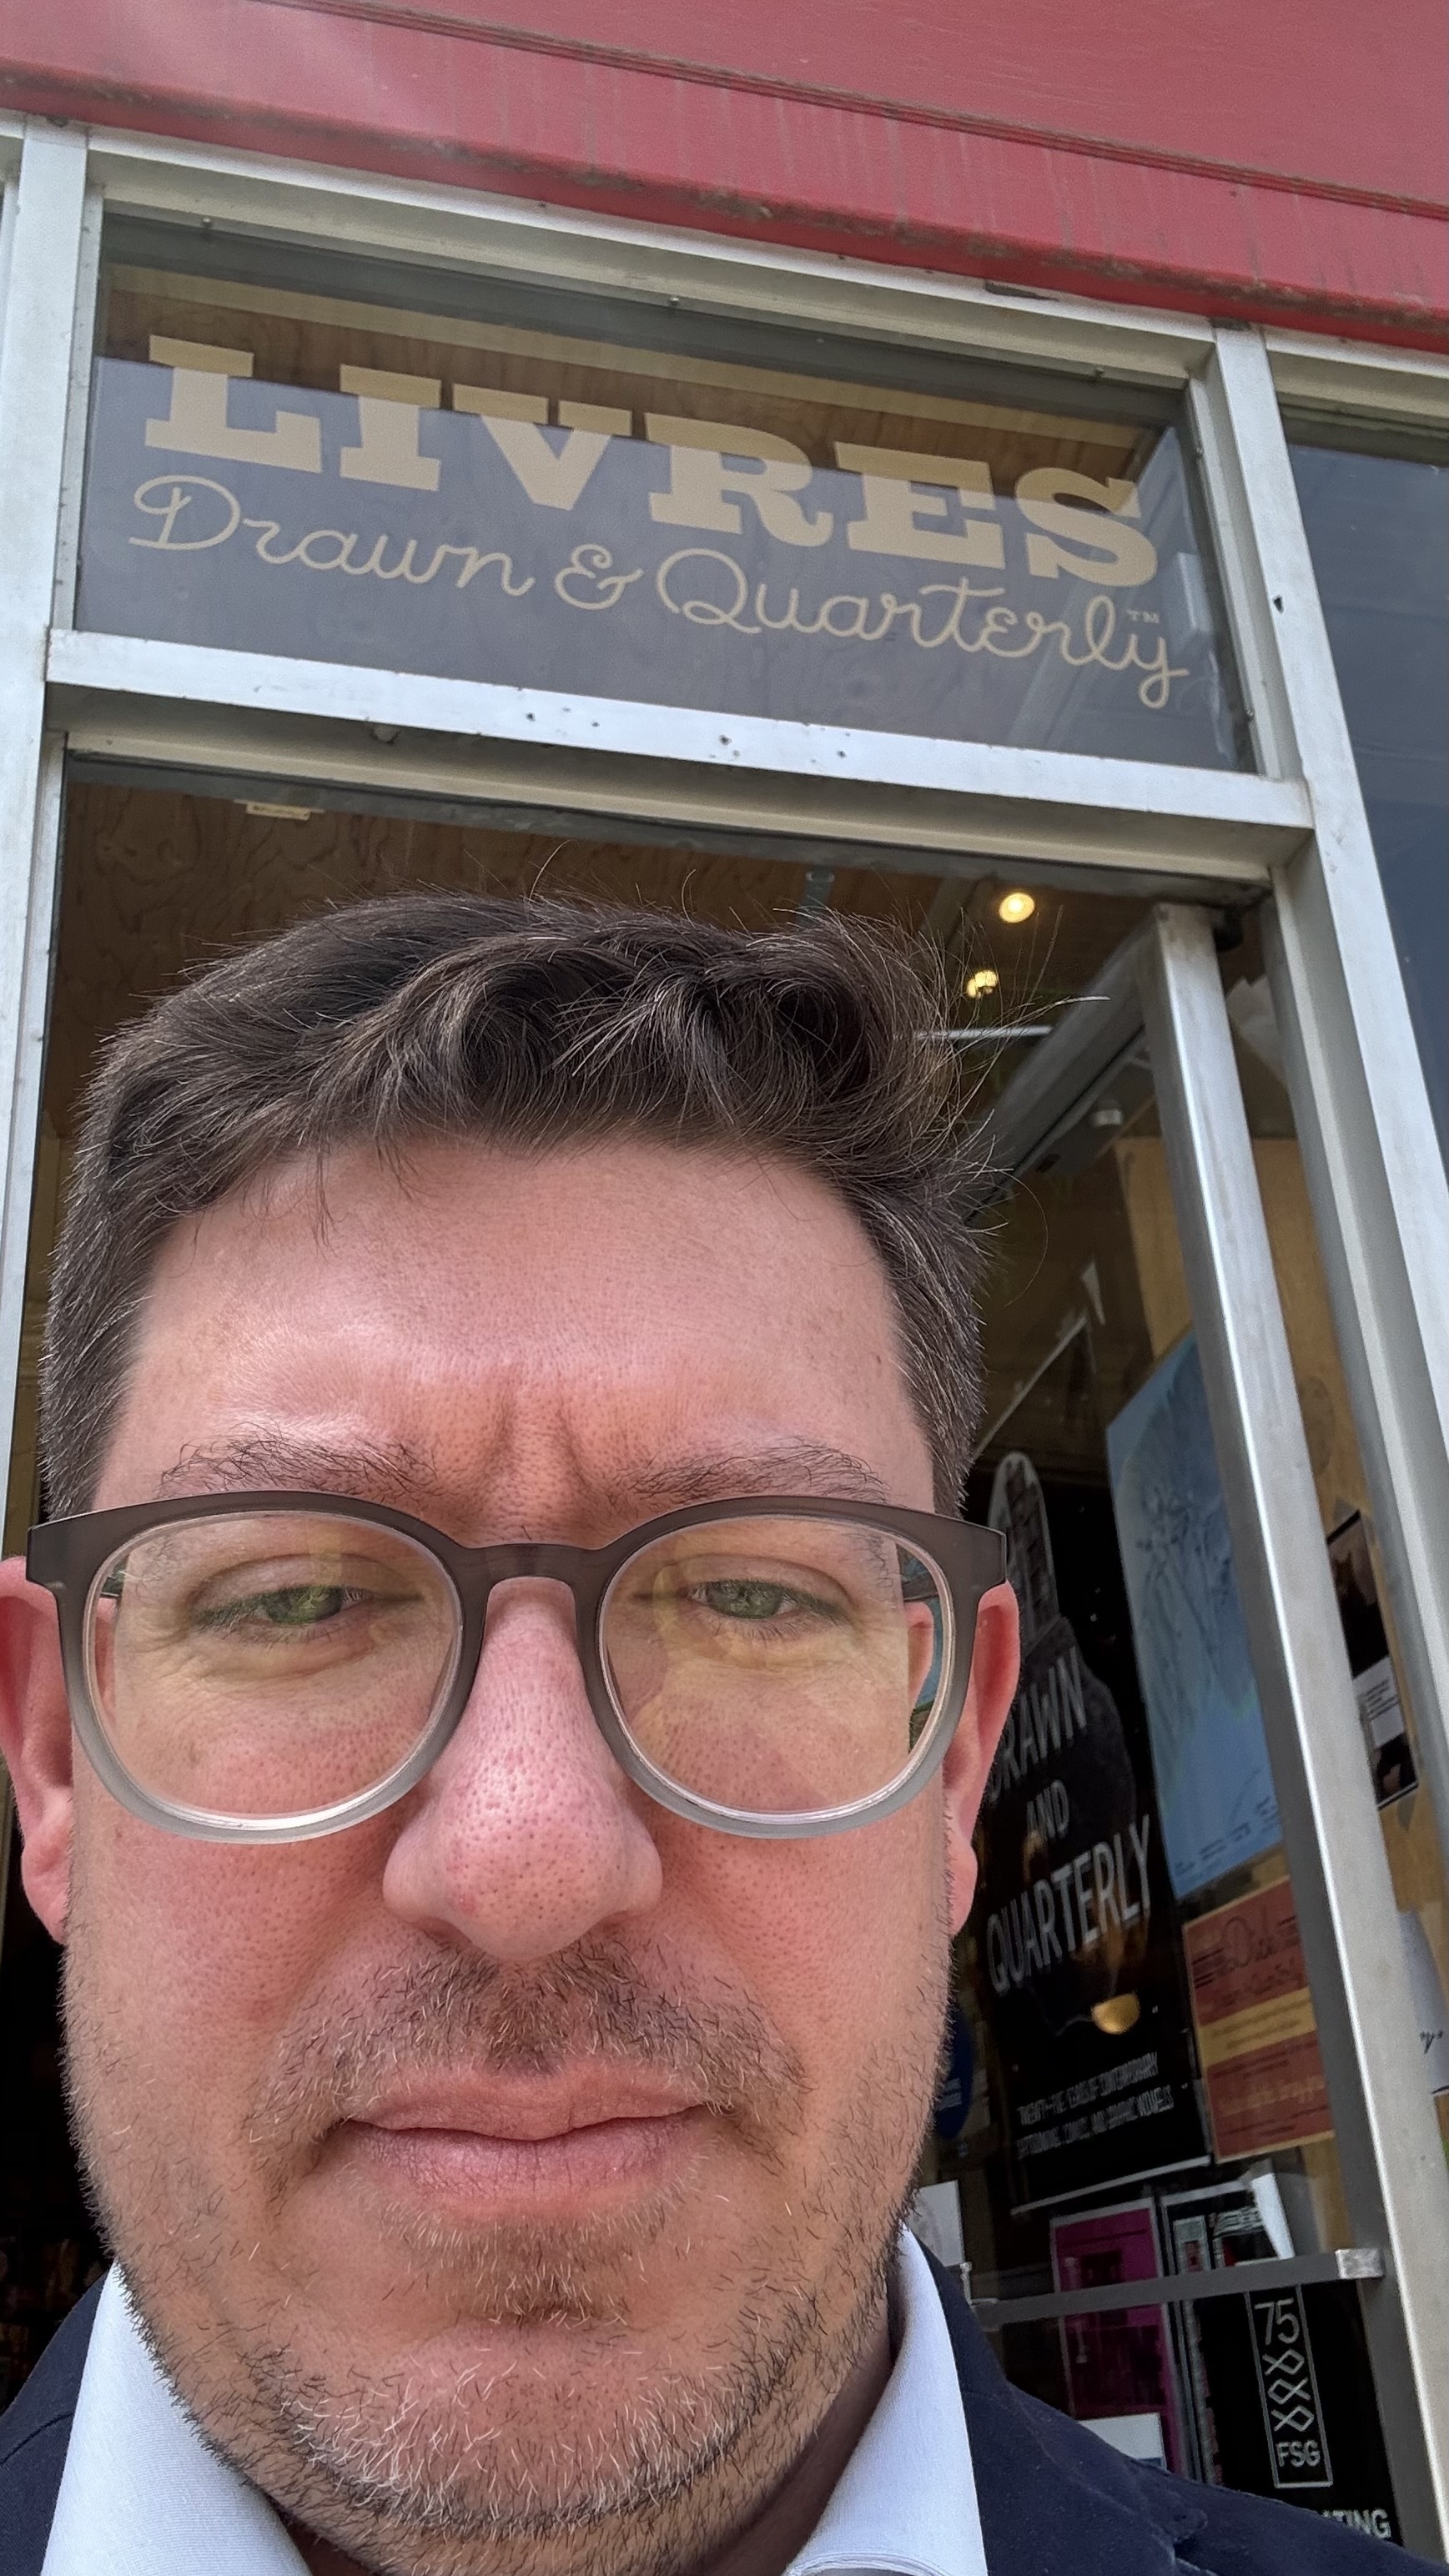 A selfie of me in front of Drawn & Quarterly Bookstore